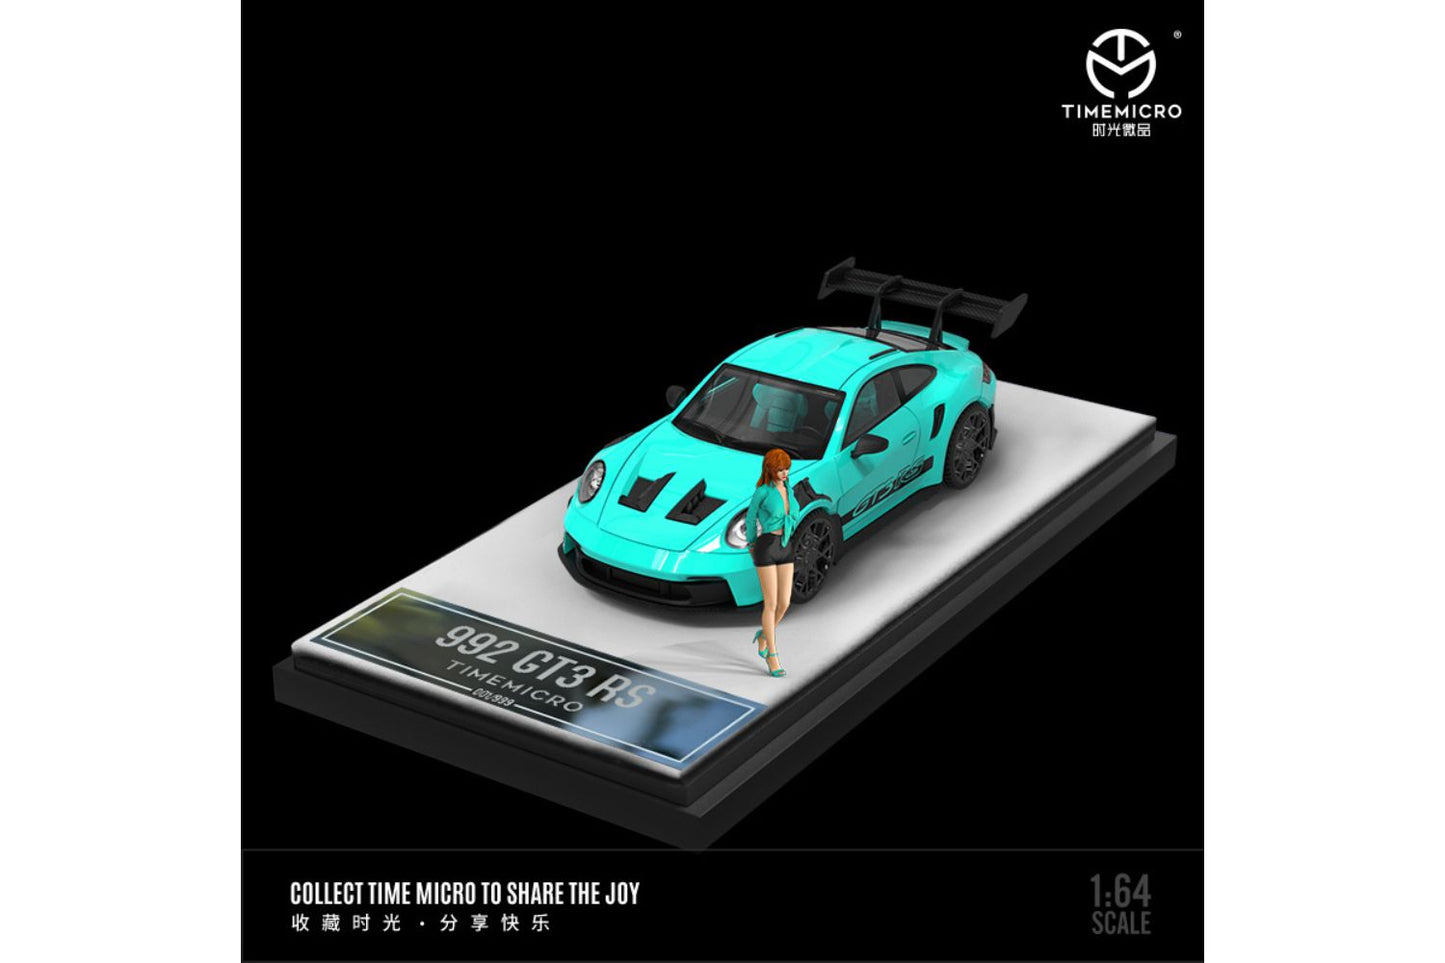 Time Micro 1/64 Porsche 911 (992) GT3 RS in Tiffany Blue